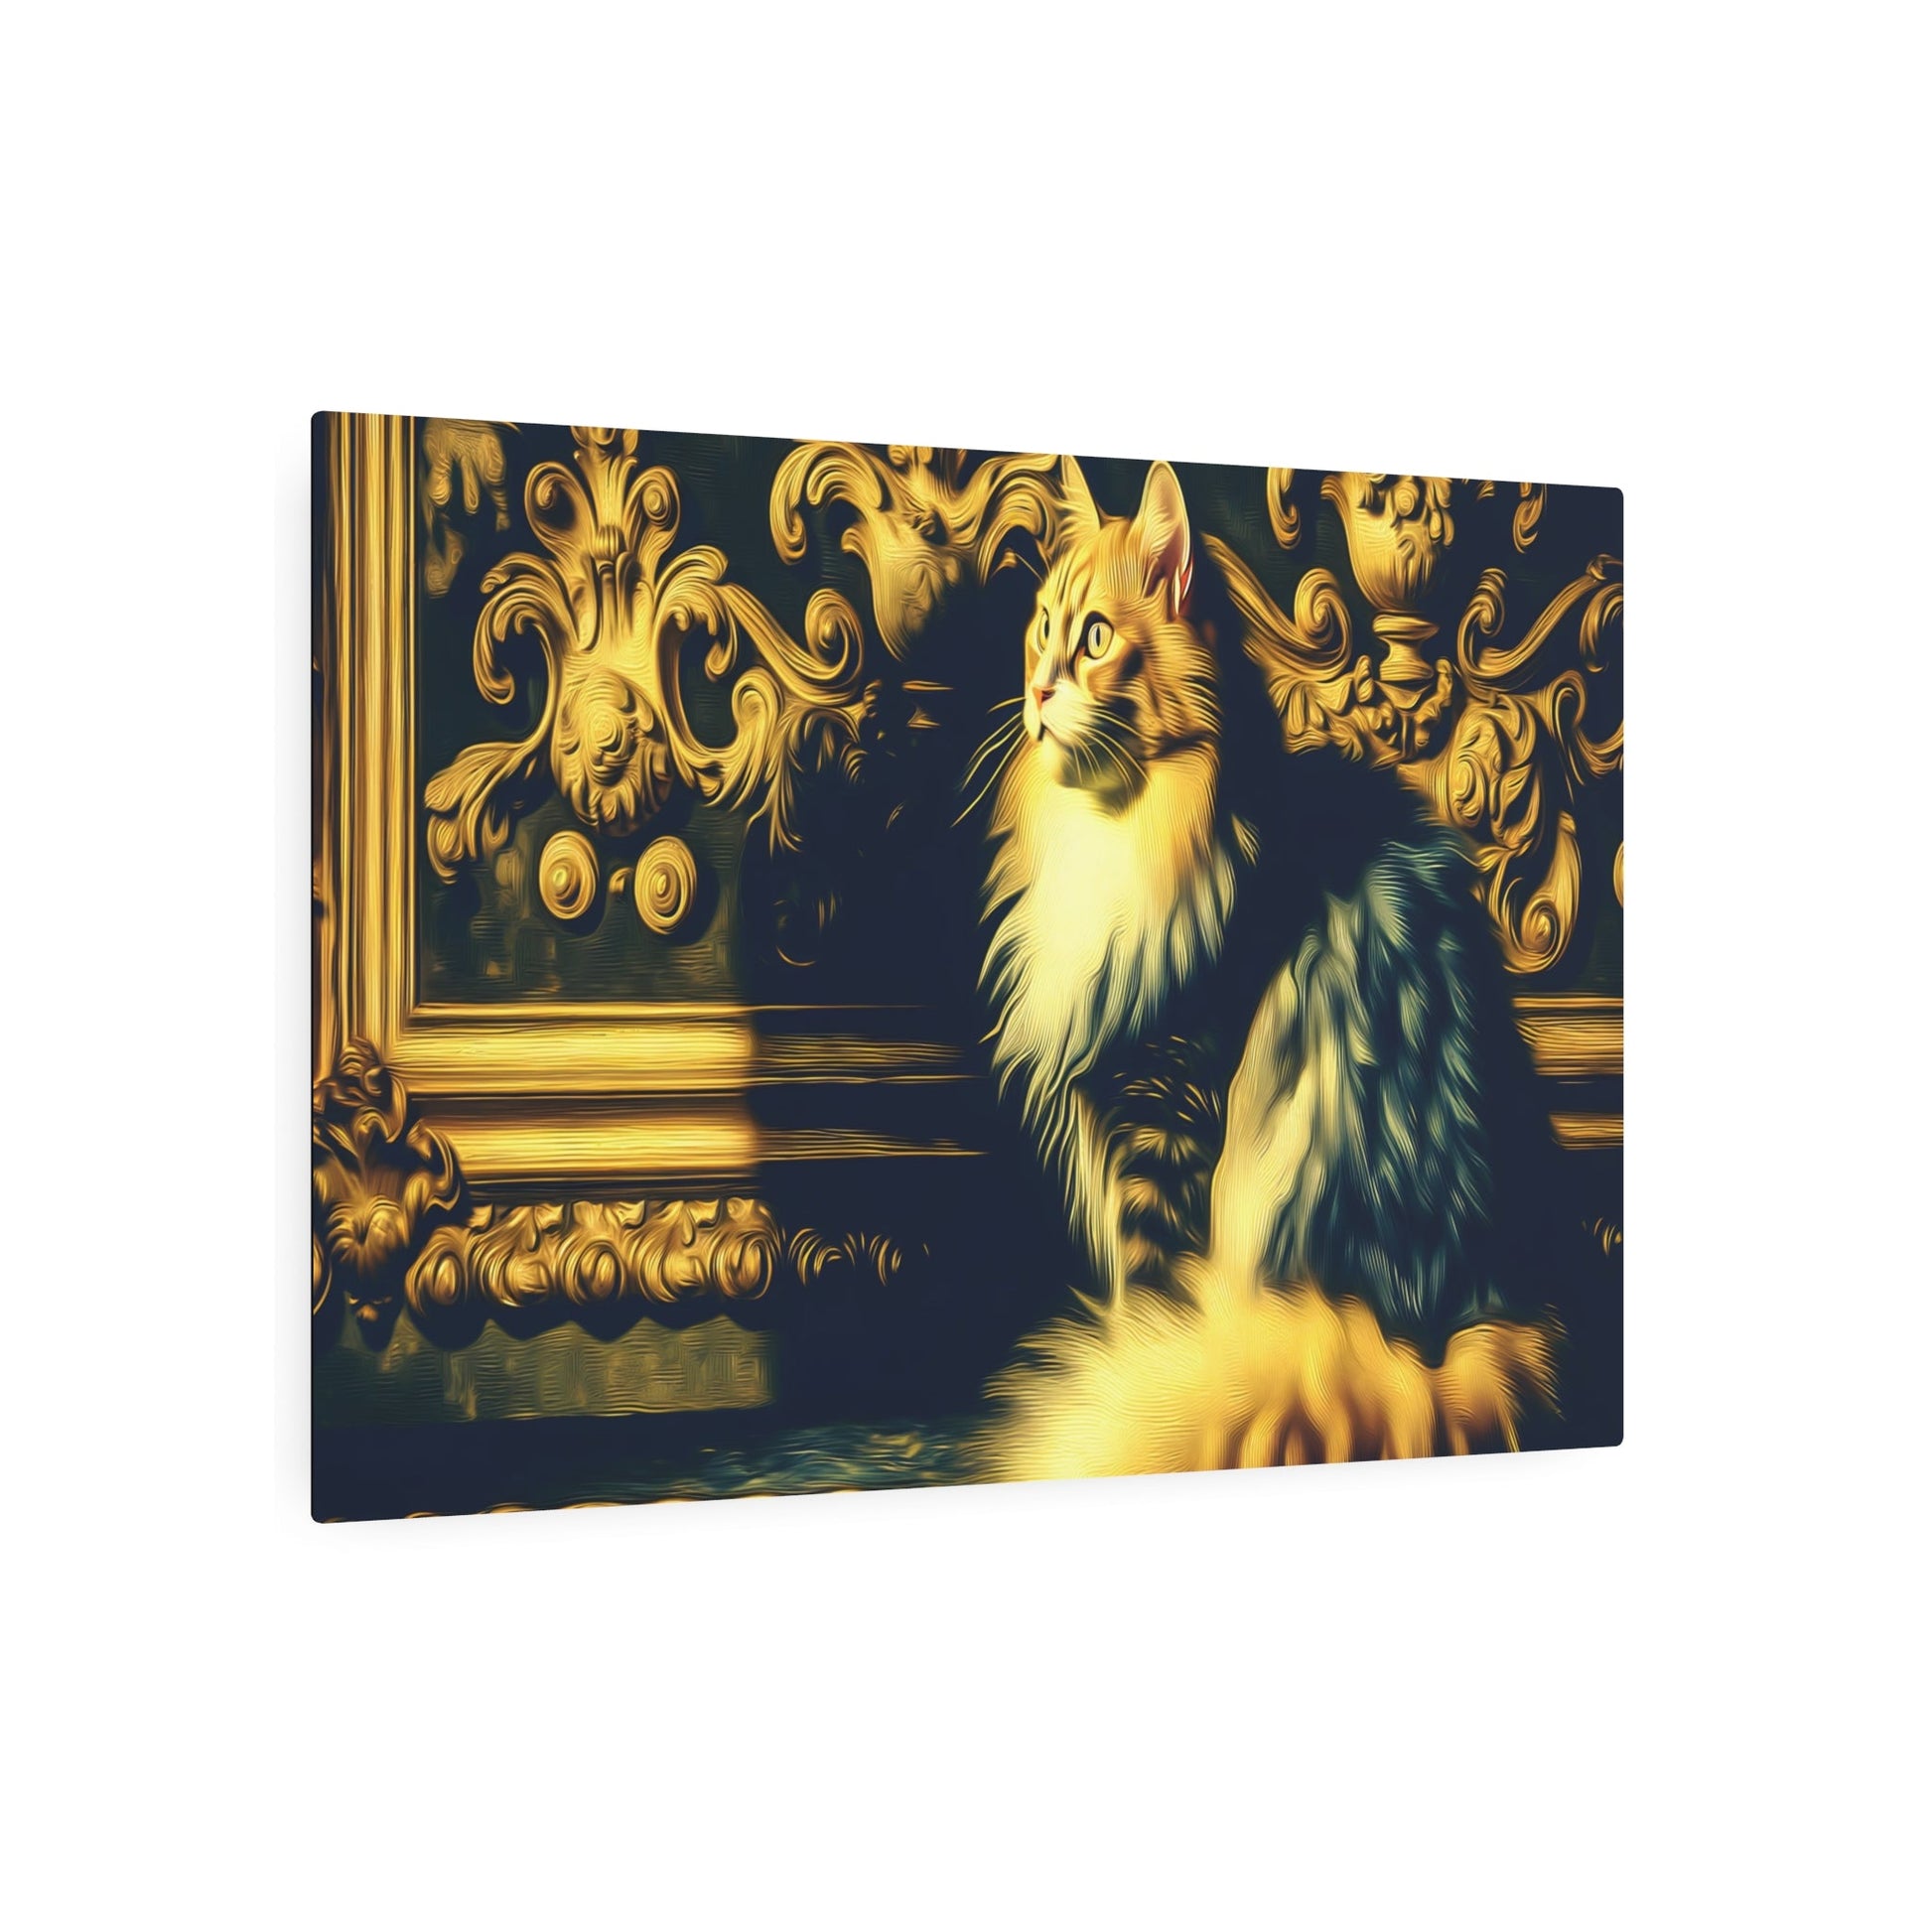 Metal Poster Art | "Baroque Art Inspired Royal Cat Image - Western Styles with Dramatic Lighting and Opulent Decoration" - Metal Poster Art 36″ x 24″ (Horizontal) 0.12''